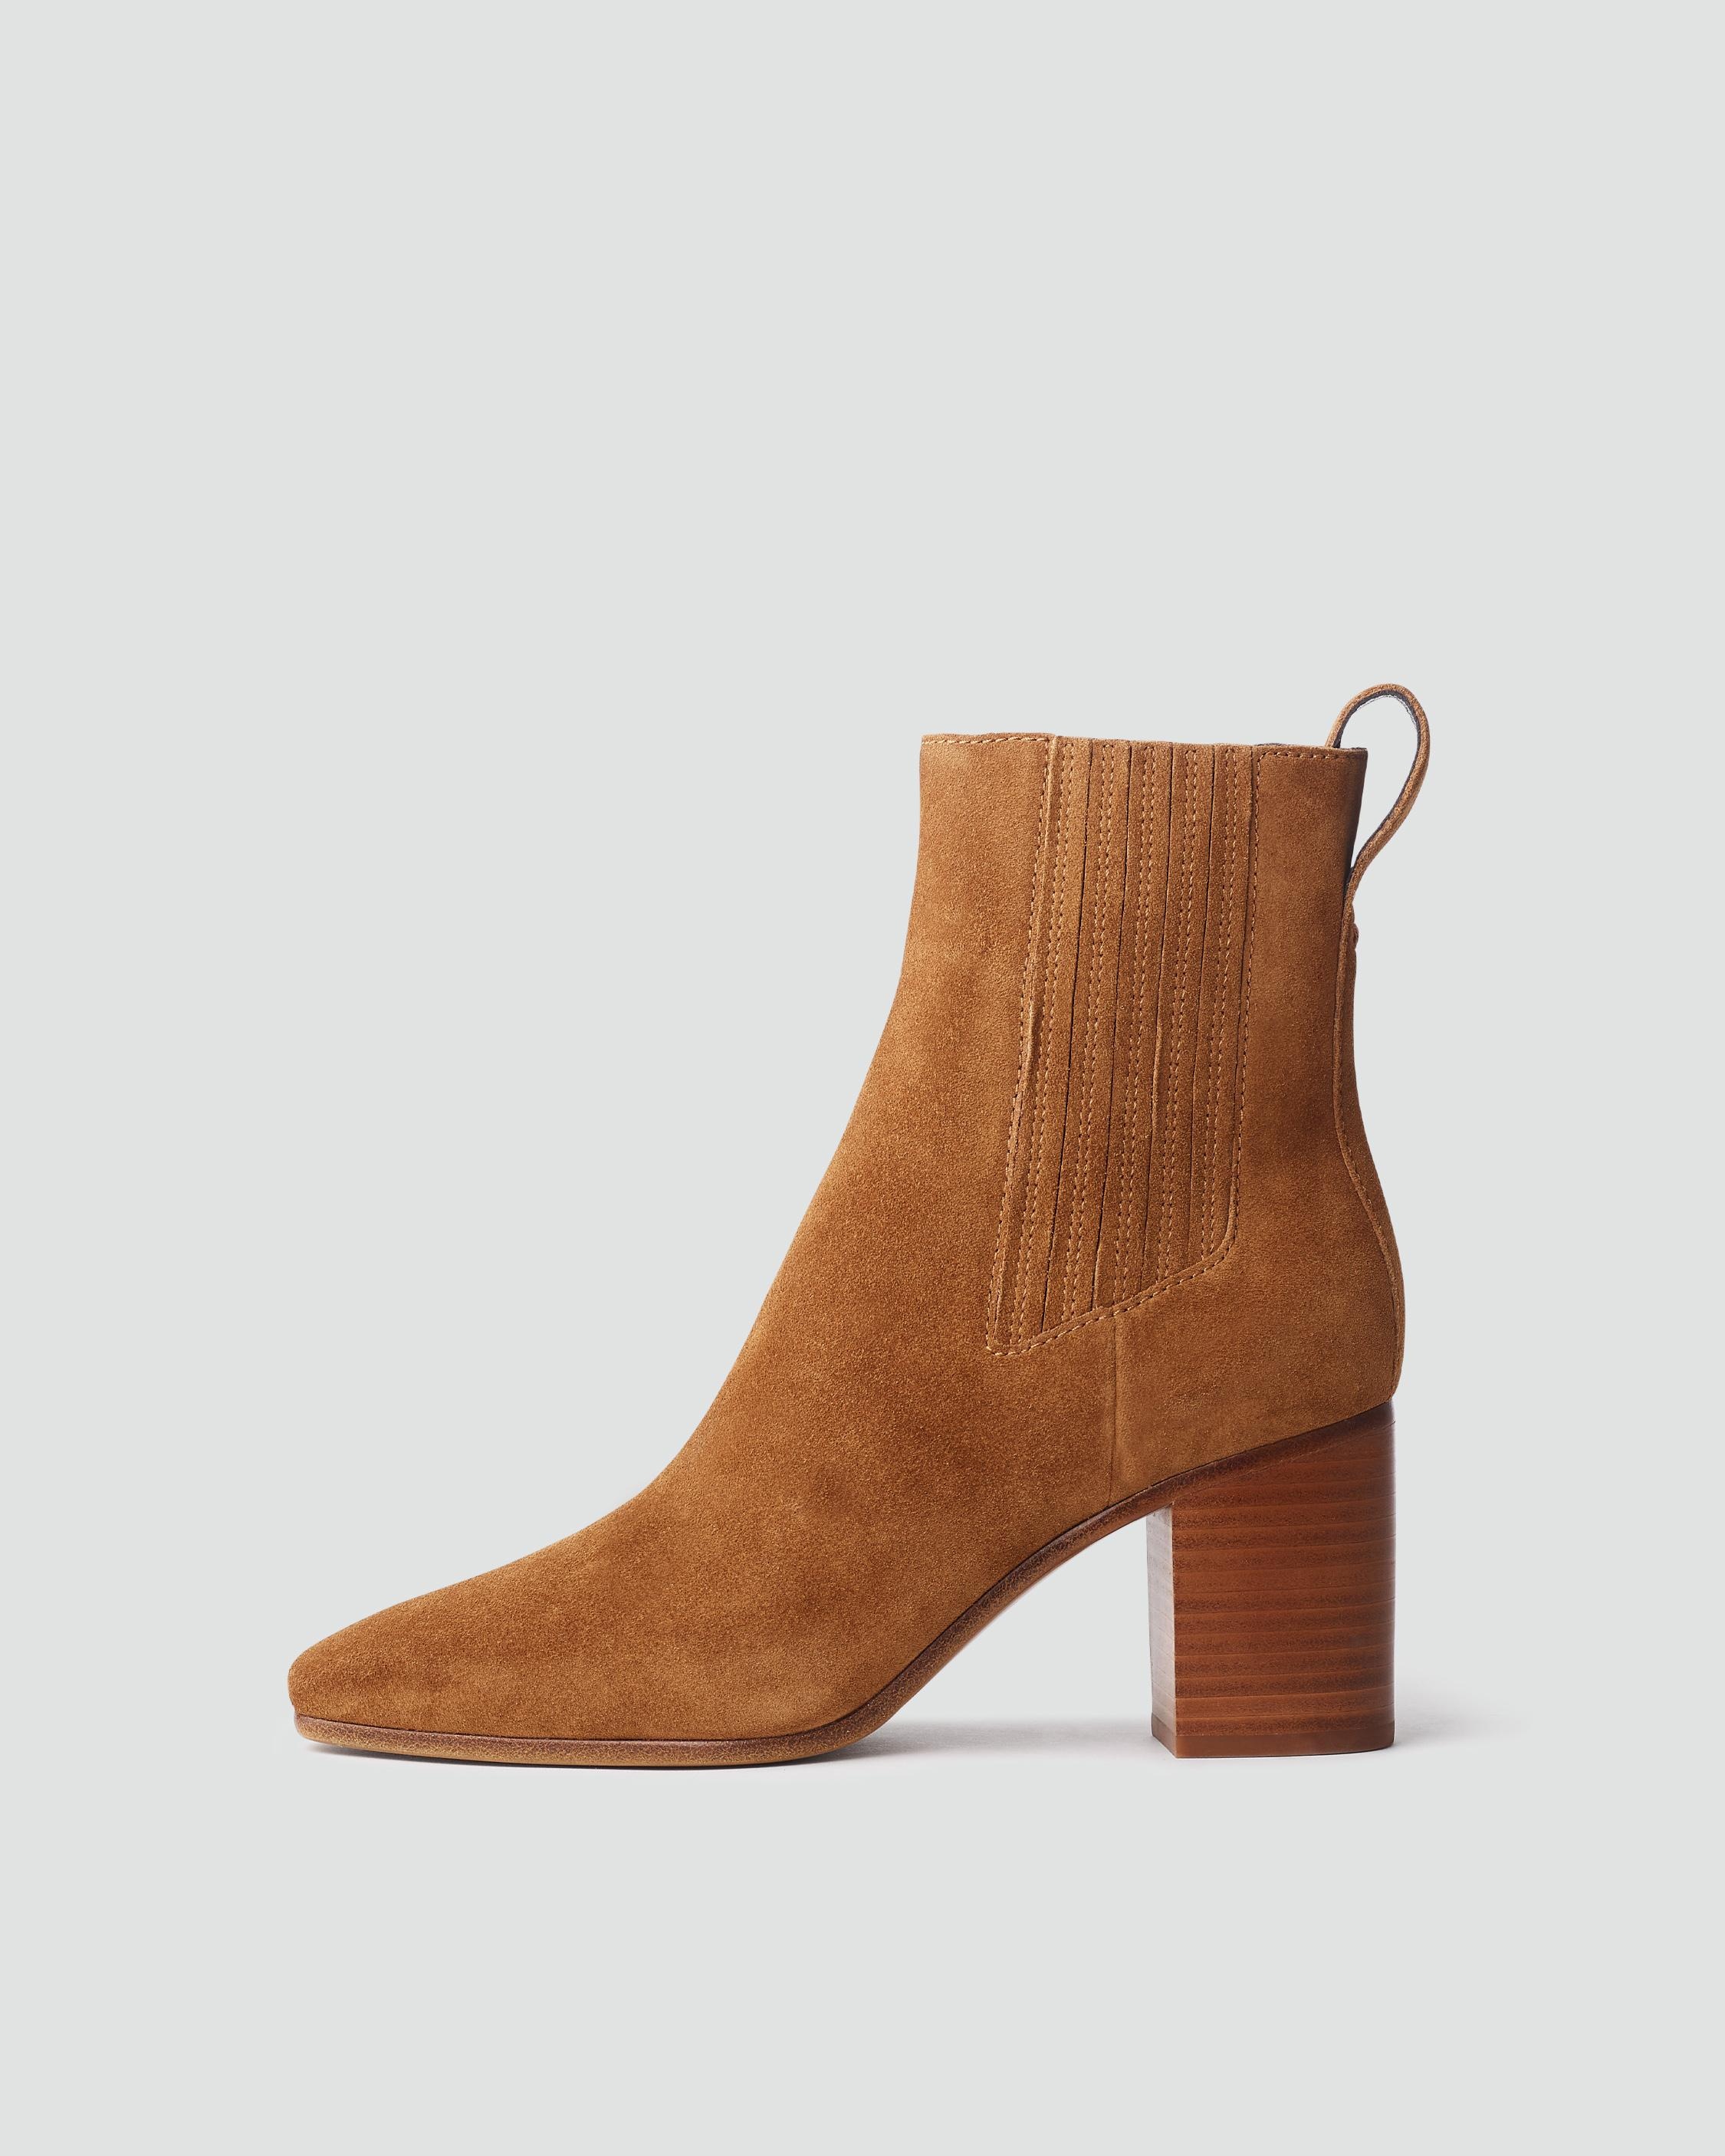 Astra Chelsea Boot - Suede
Chelsea Ankle Boot - 1